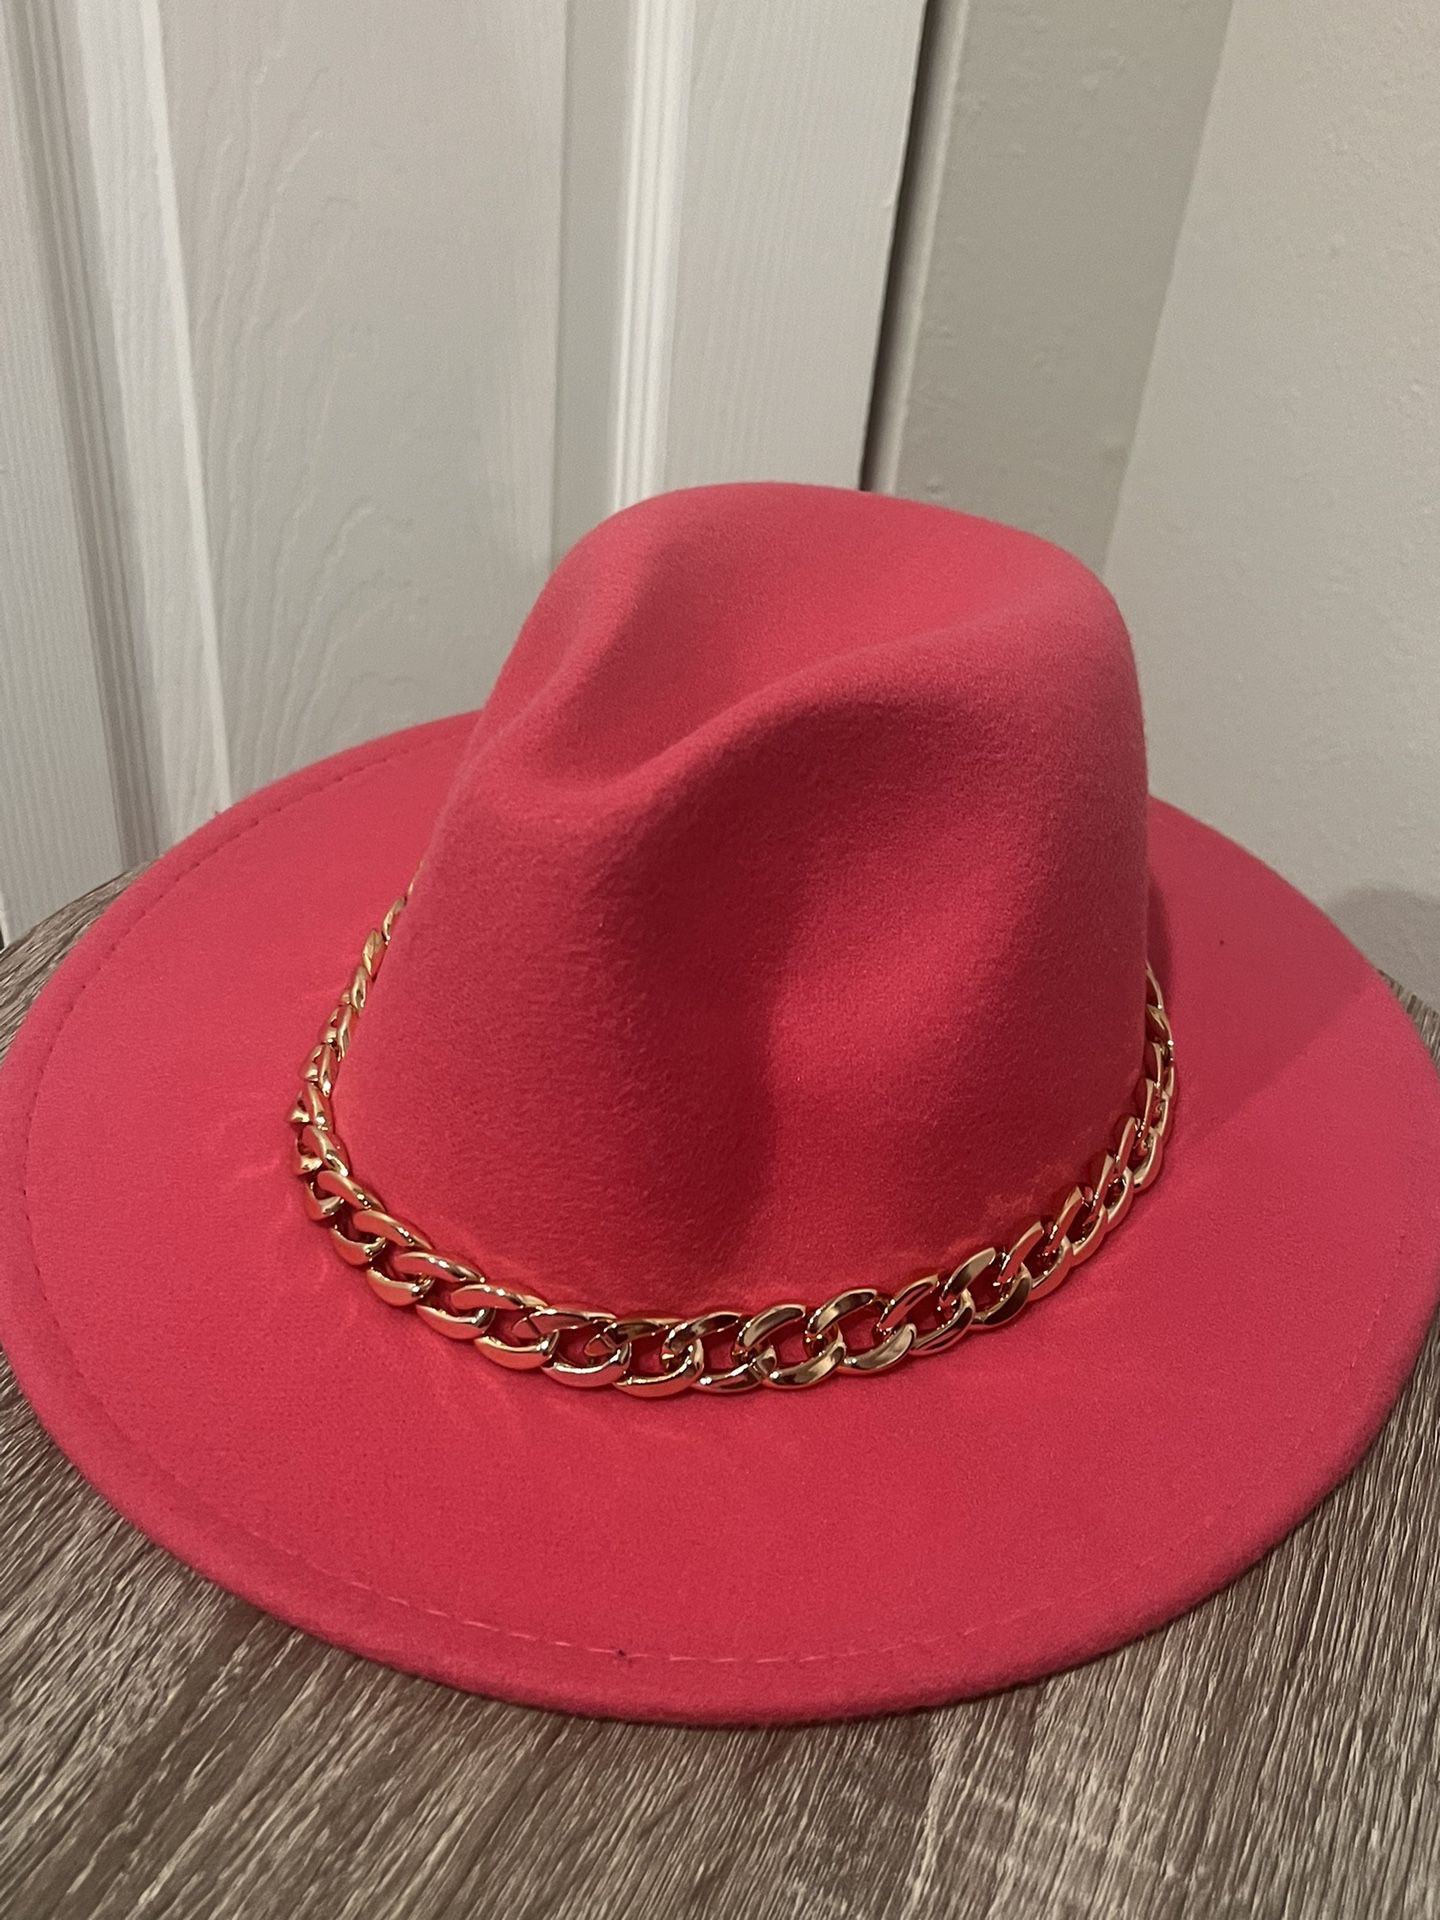 A Pink Cowgirl Hat